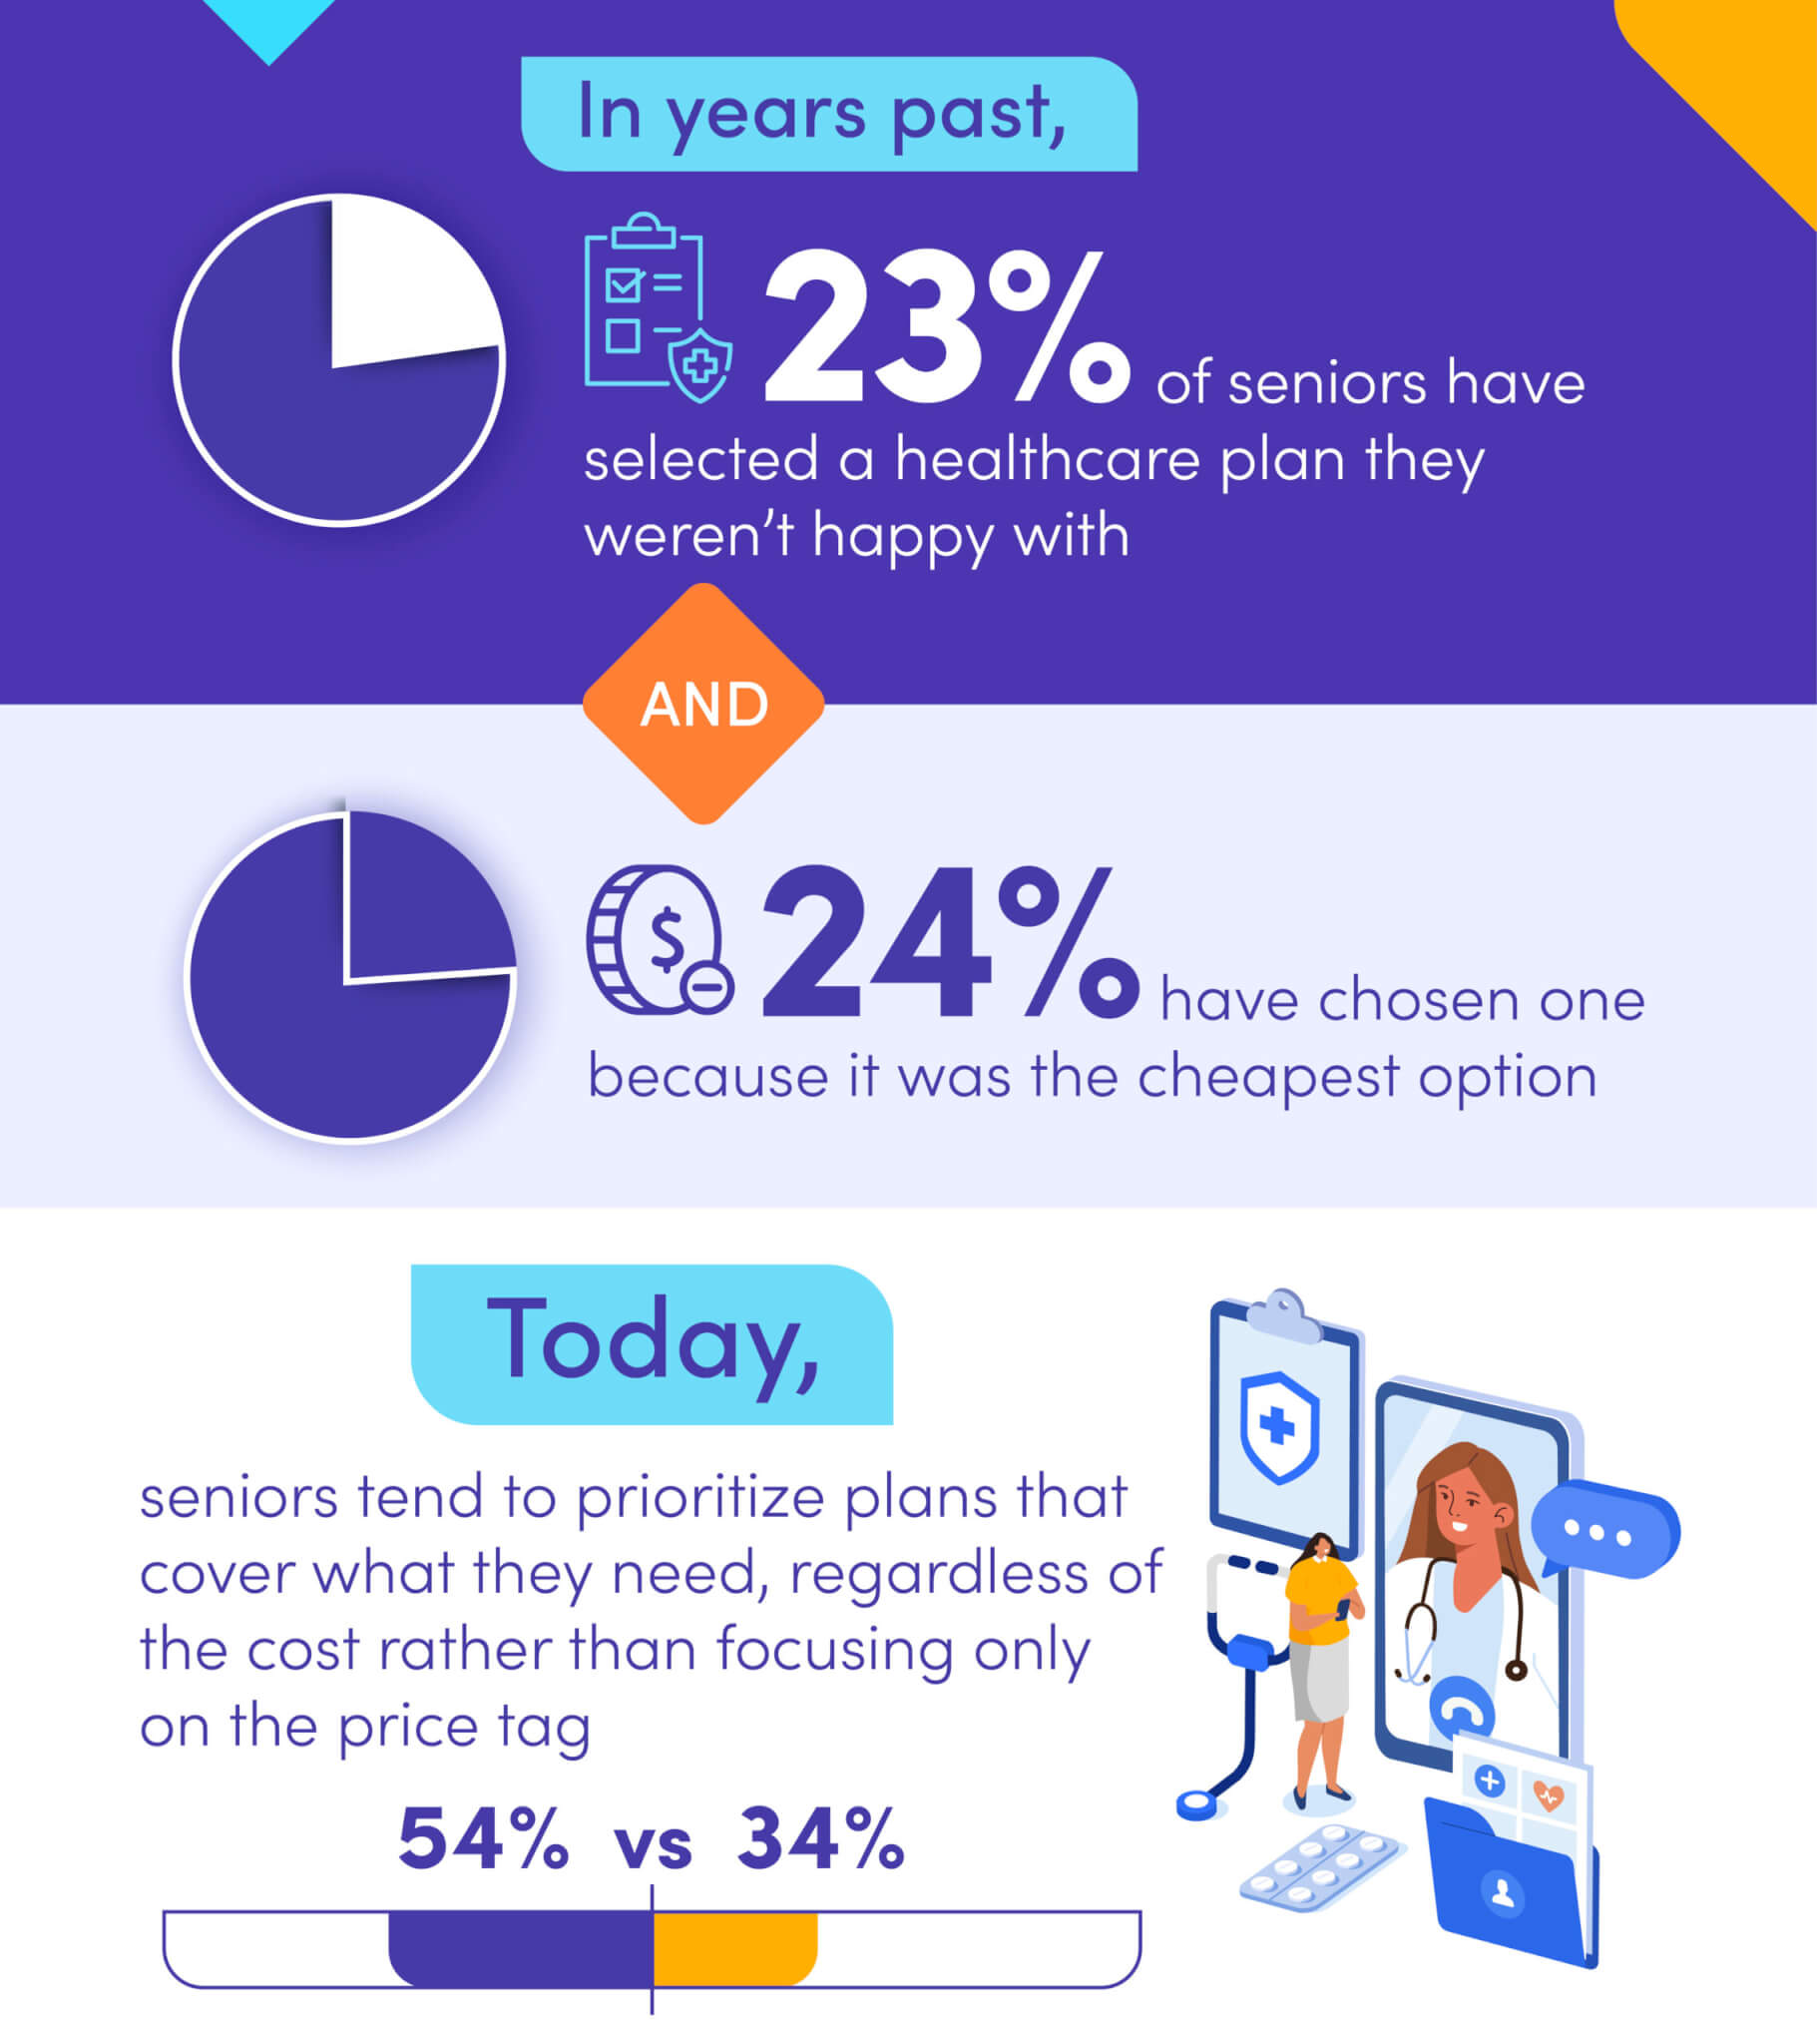 Infographic about senior healthcare plans